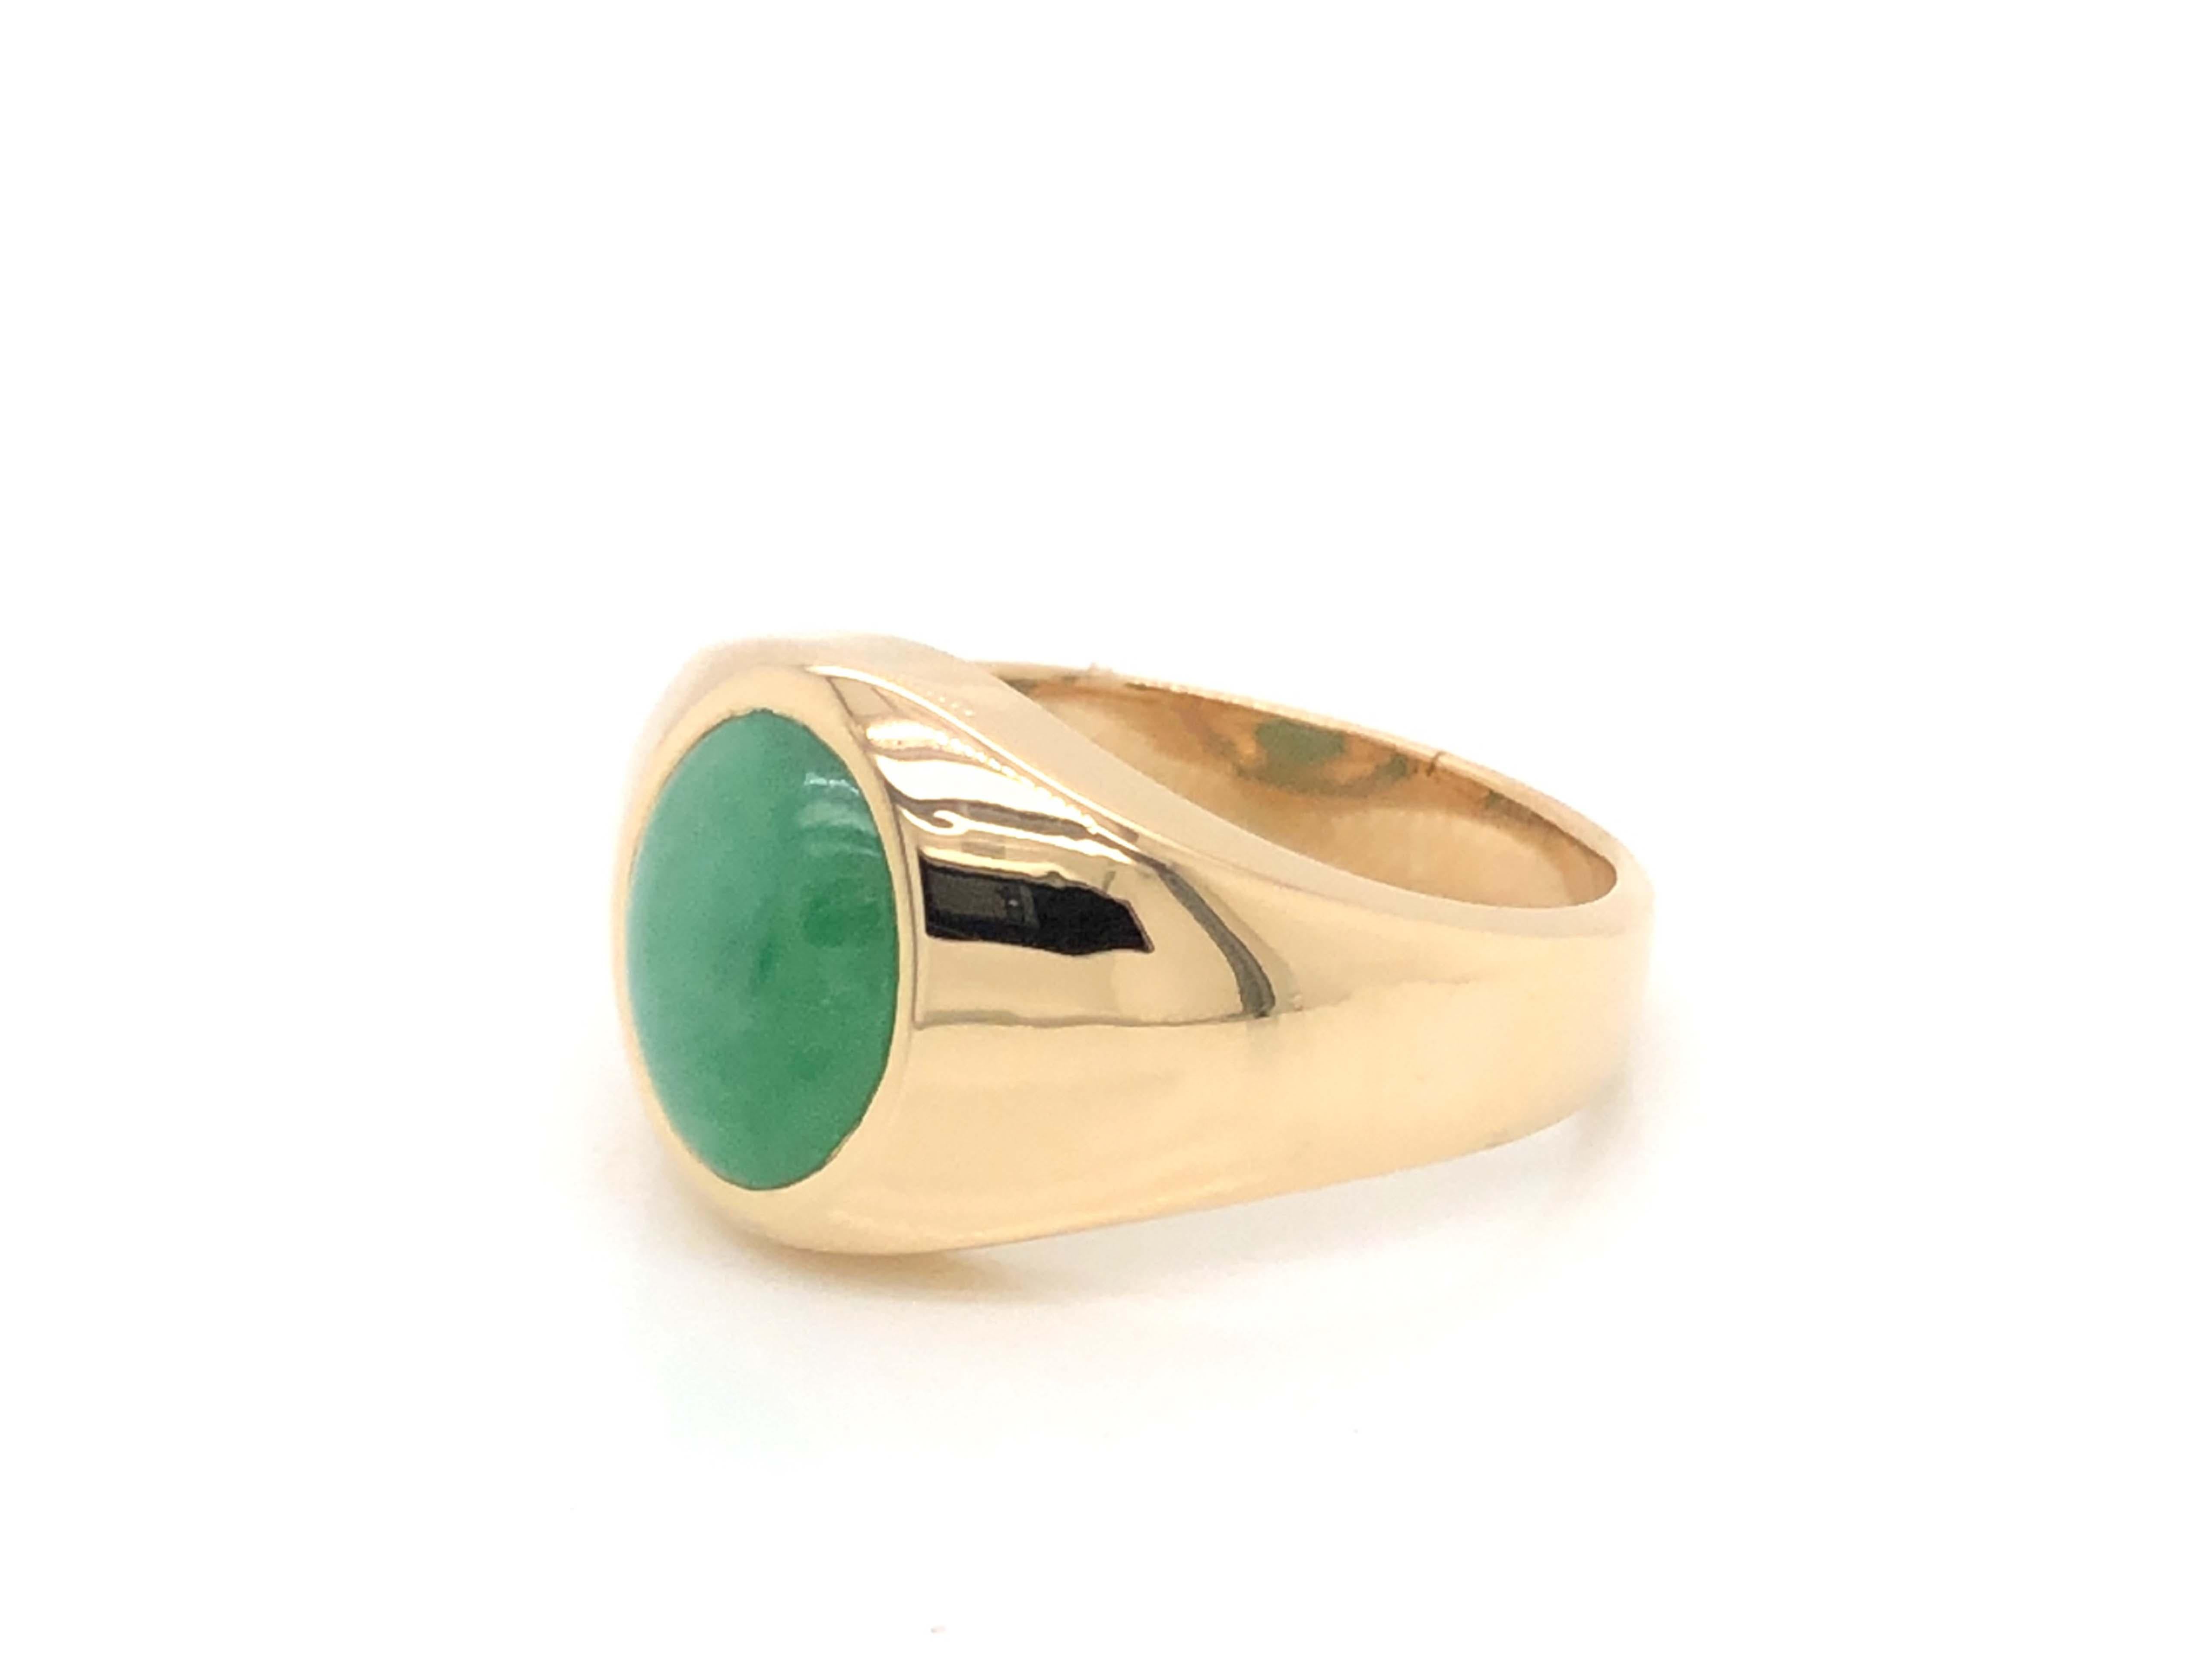 Oval Cut Vintage Men's Oval Cabochon Green Jade Ring, 14k Yellow Gold